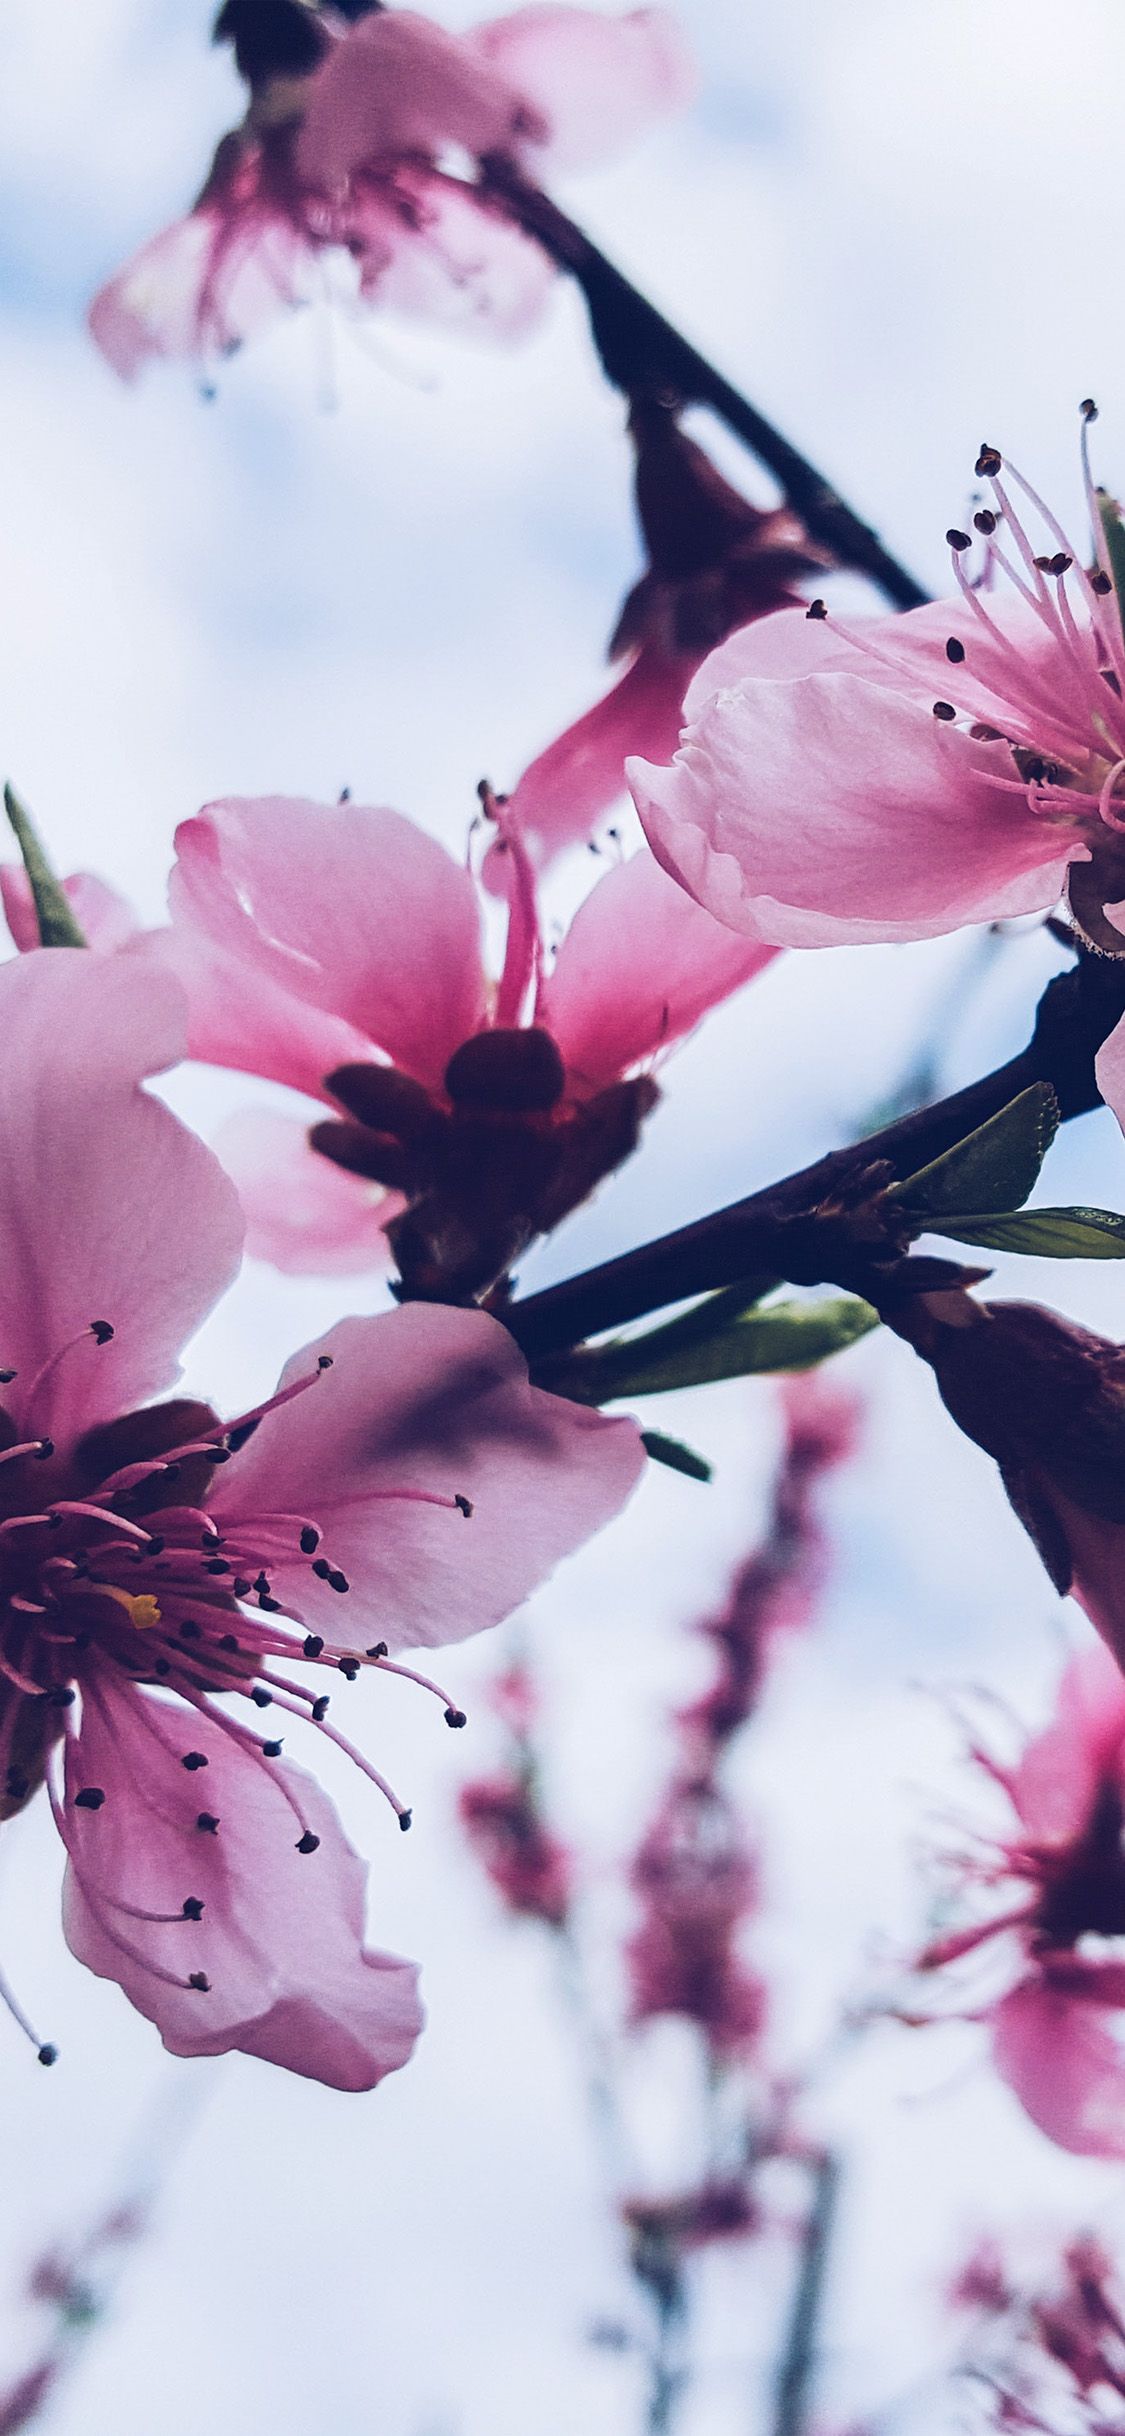 iPhone X wallpaper. flower blossom cherry spring nature